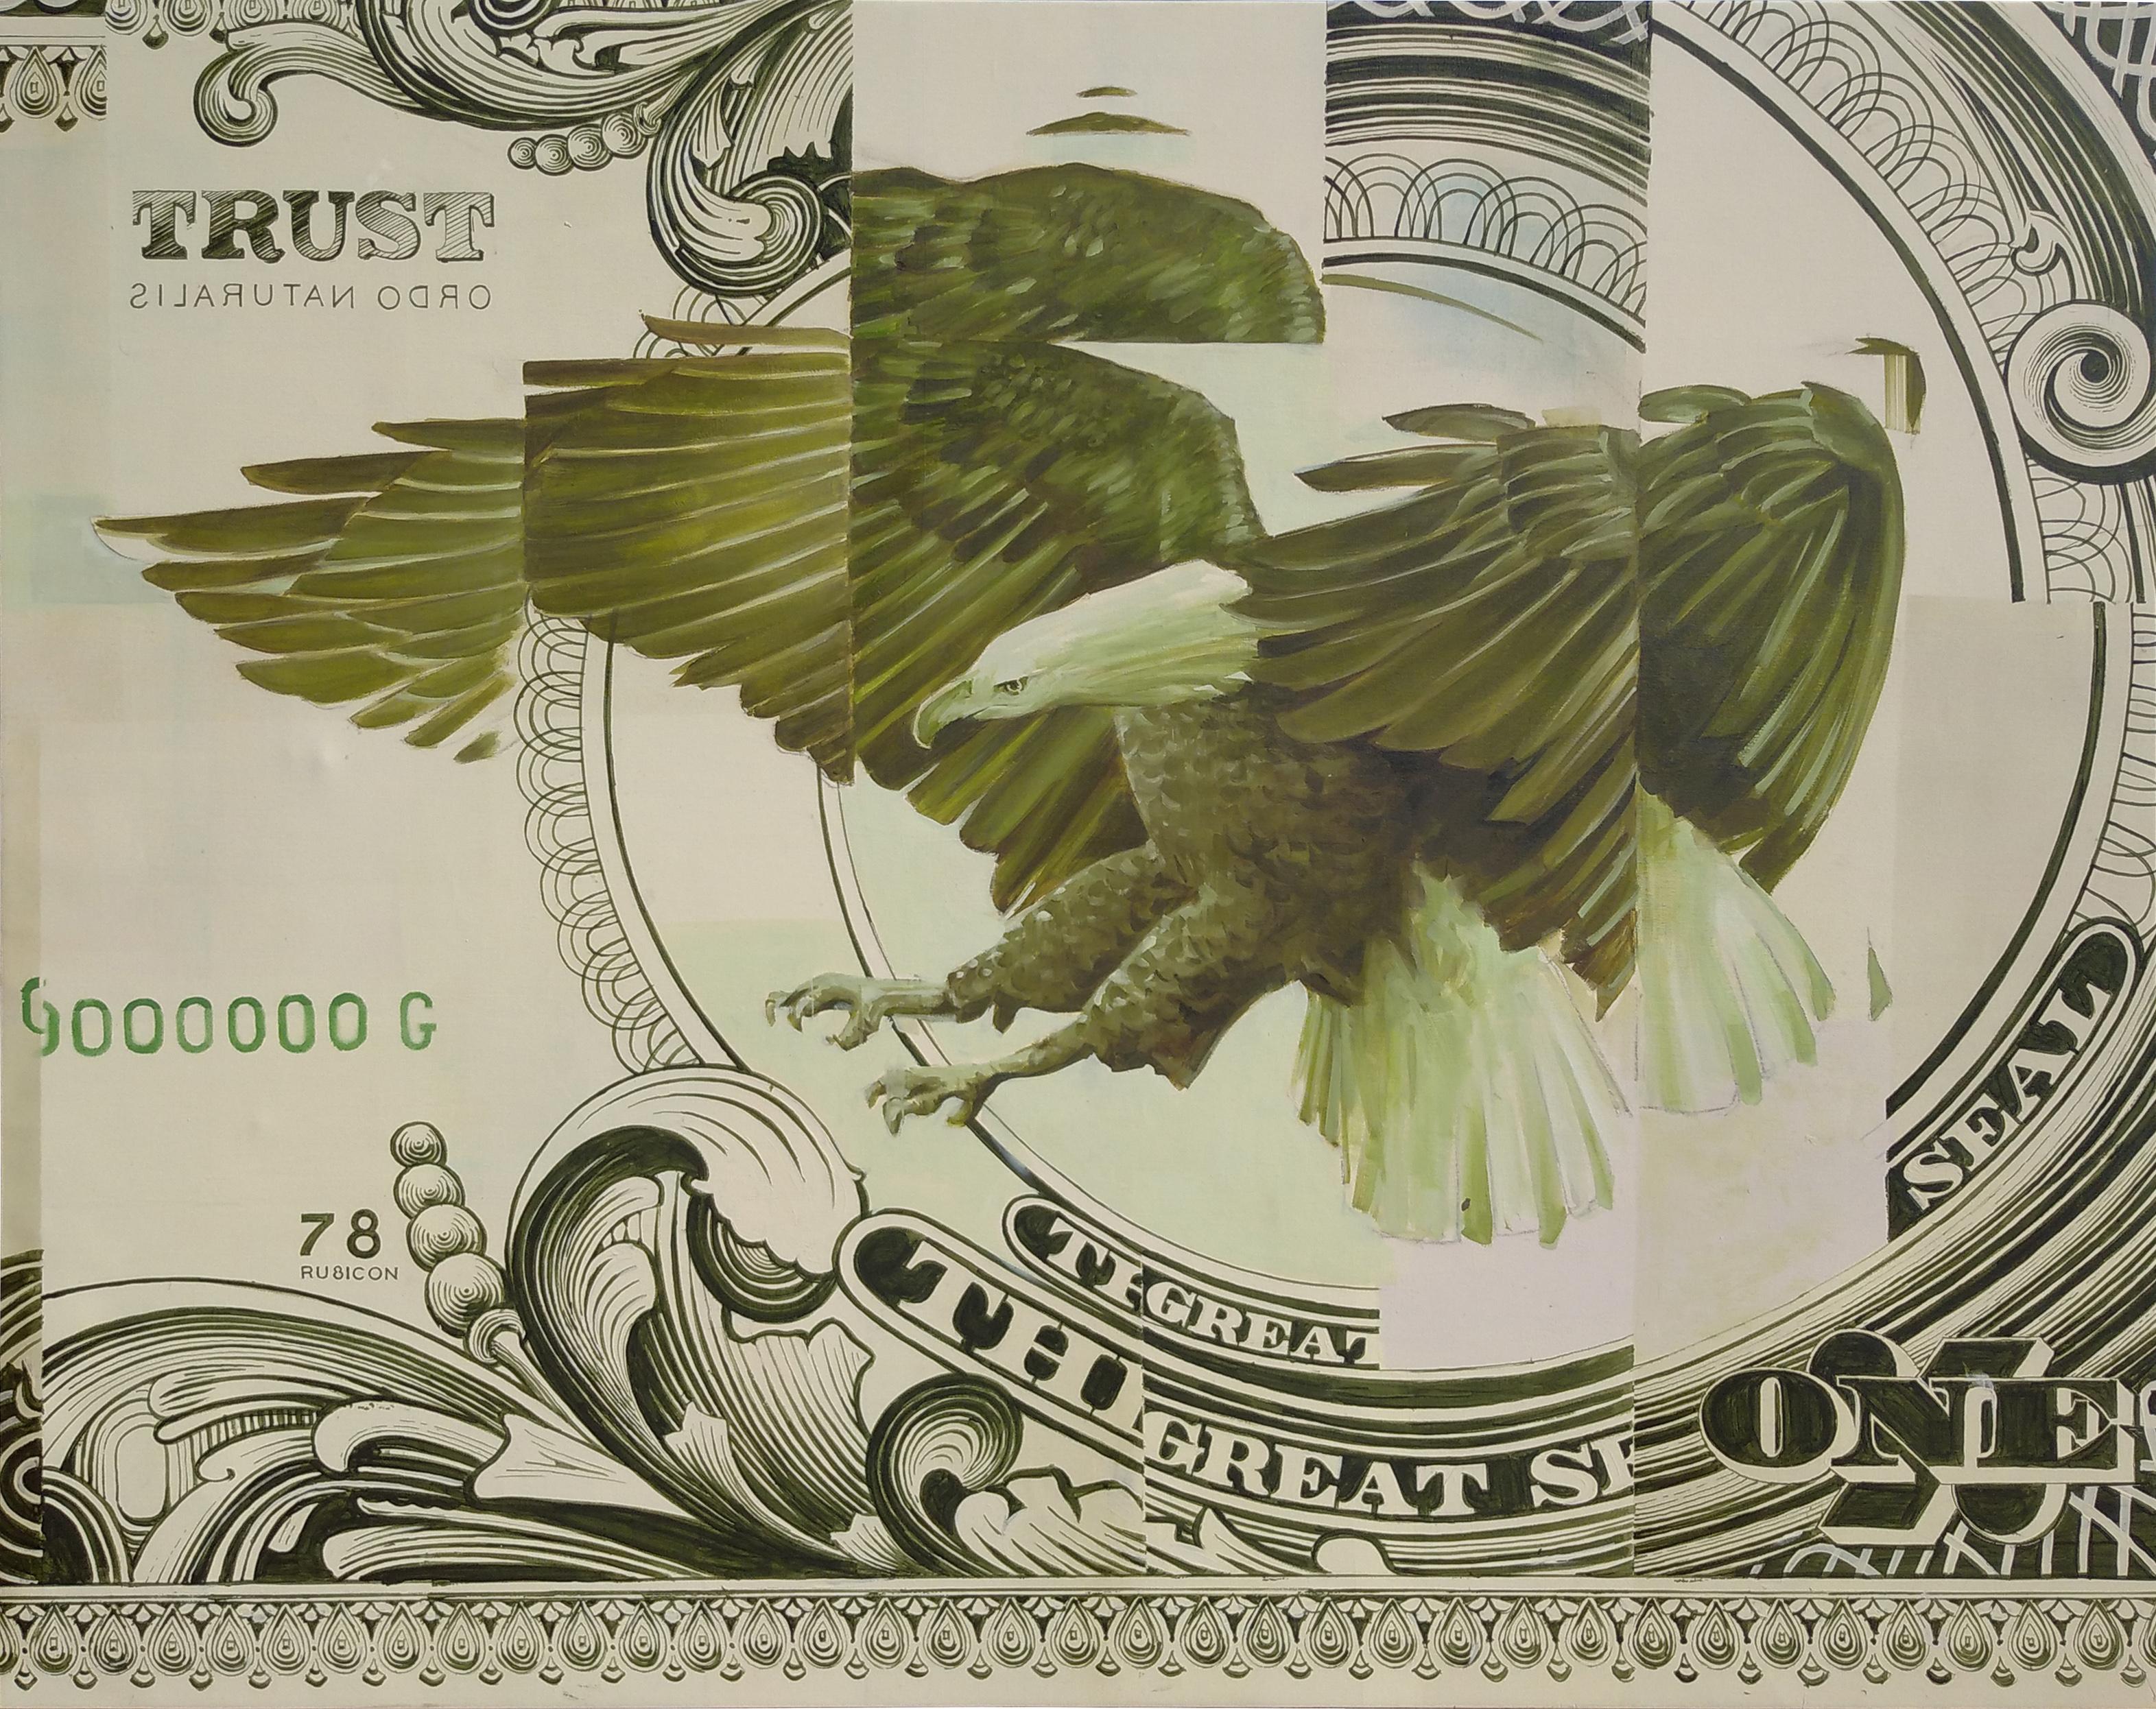 RU8ICON1 Figurative Painting - Ordus Naturalis, Oil and Acrylic on Canvas Painting, Eagle & US Dollar, Currency